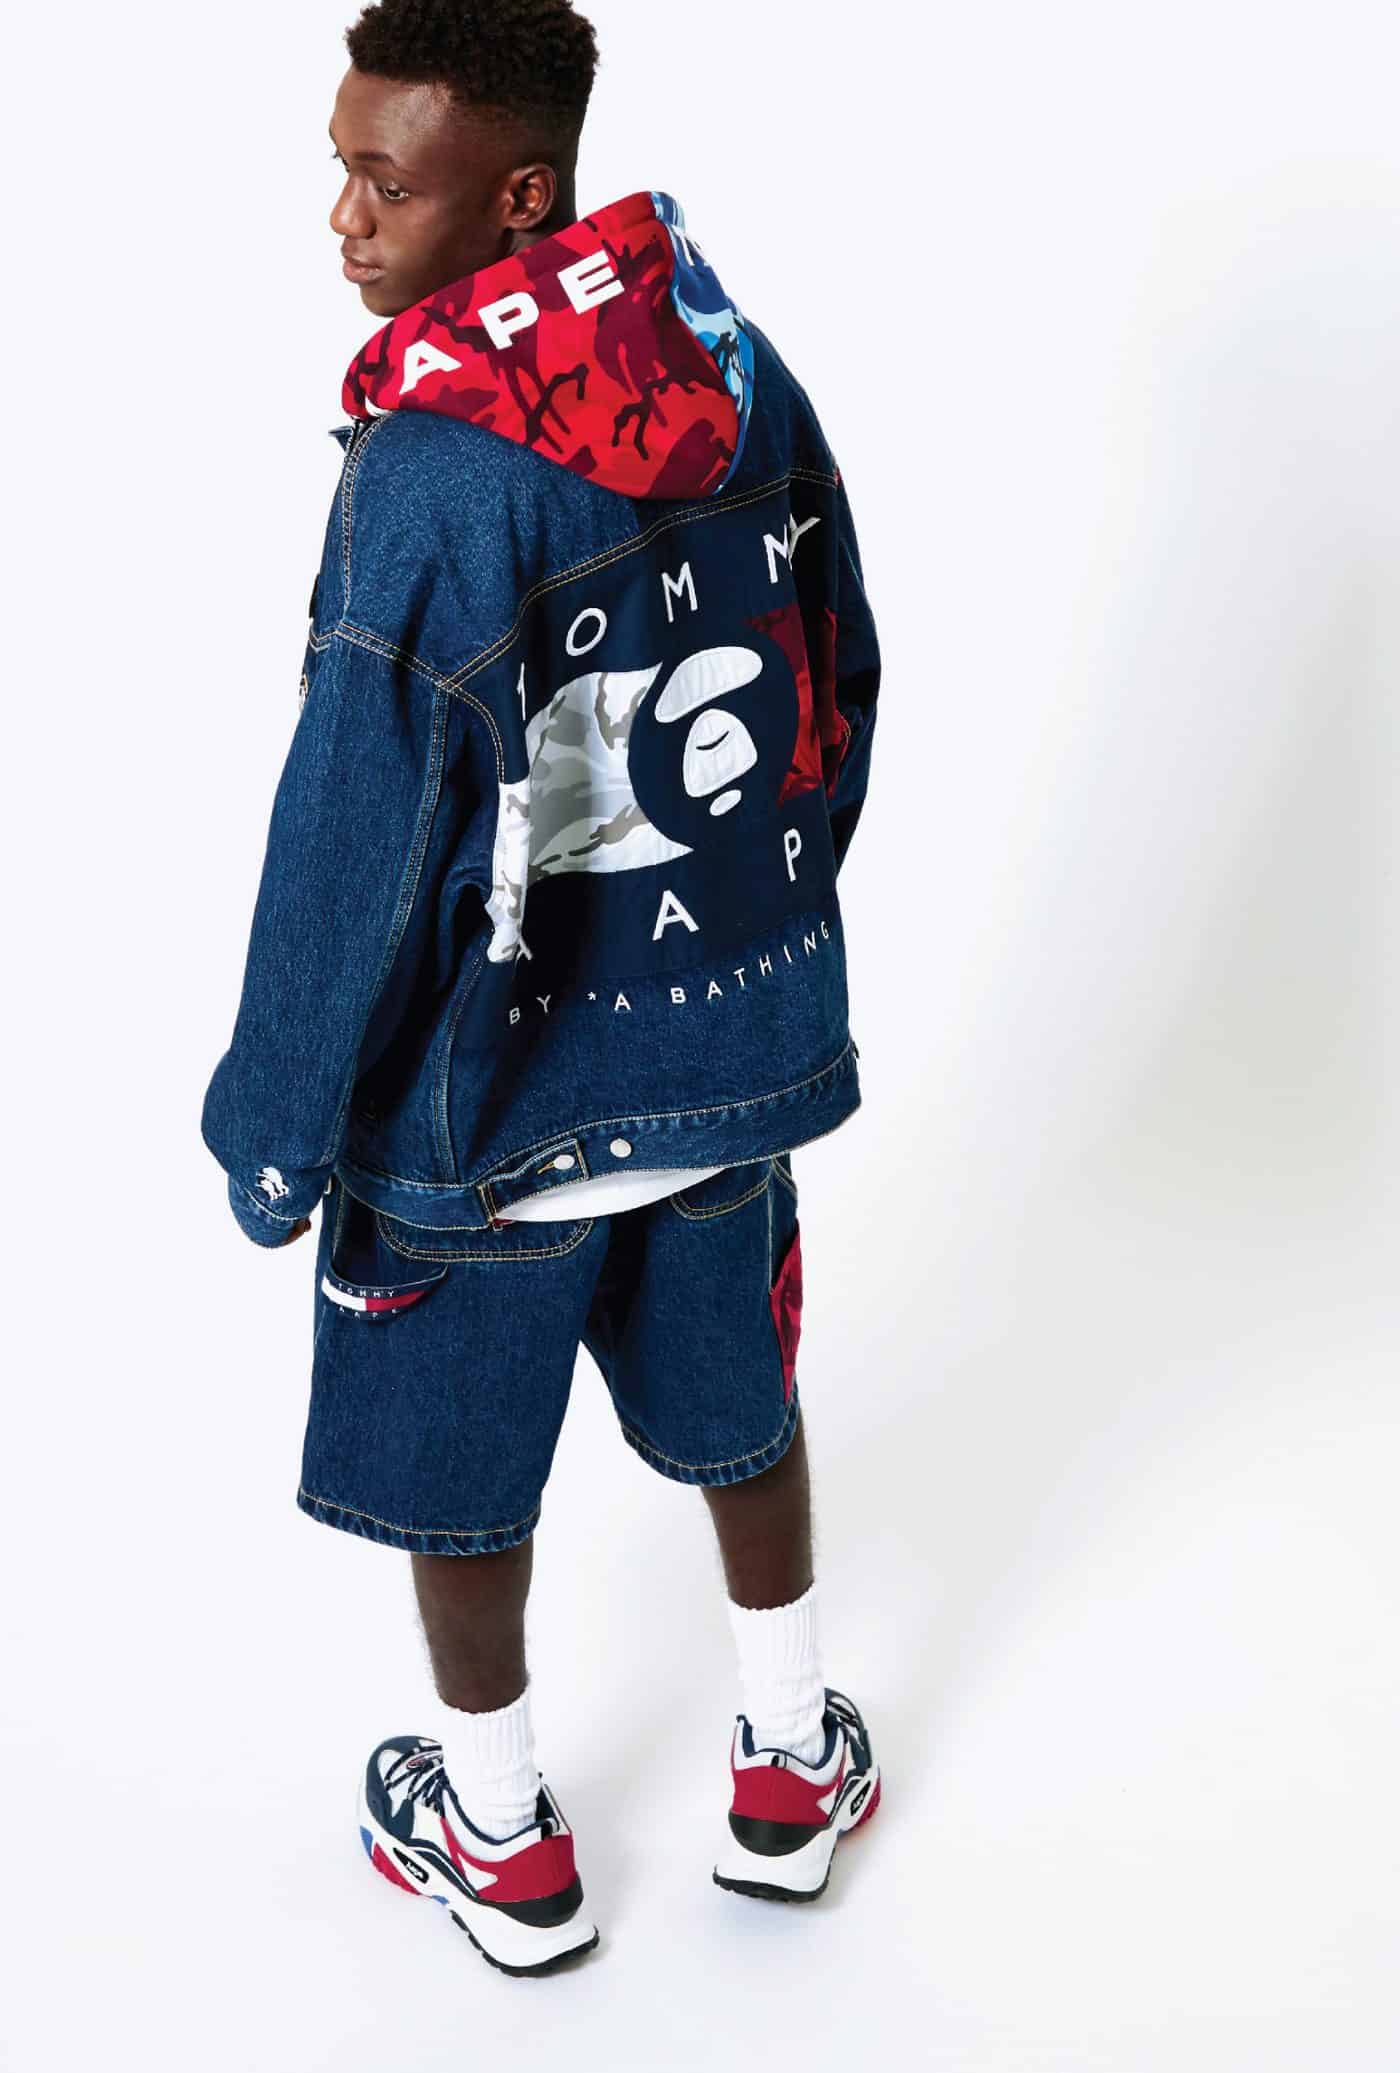 gebed Doe een poging Geneigd zijn Tommy Hilfiger and Bape Launch '90s-Inspired Collection - Daily Front Row